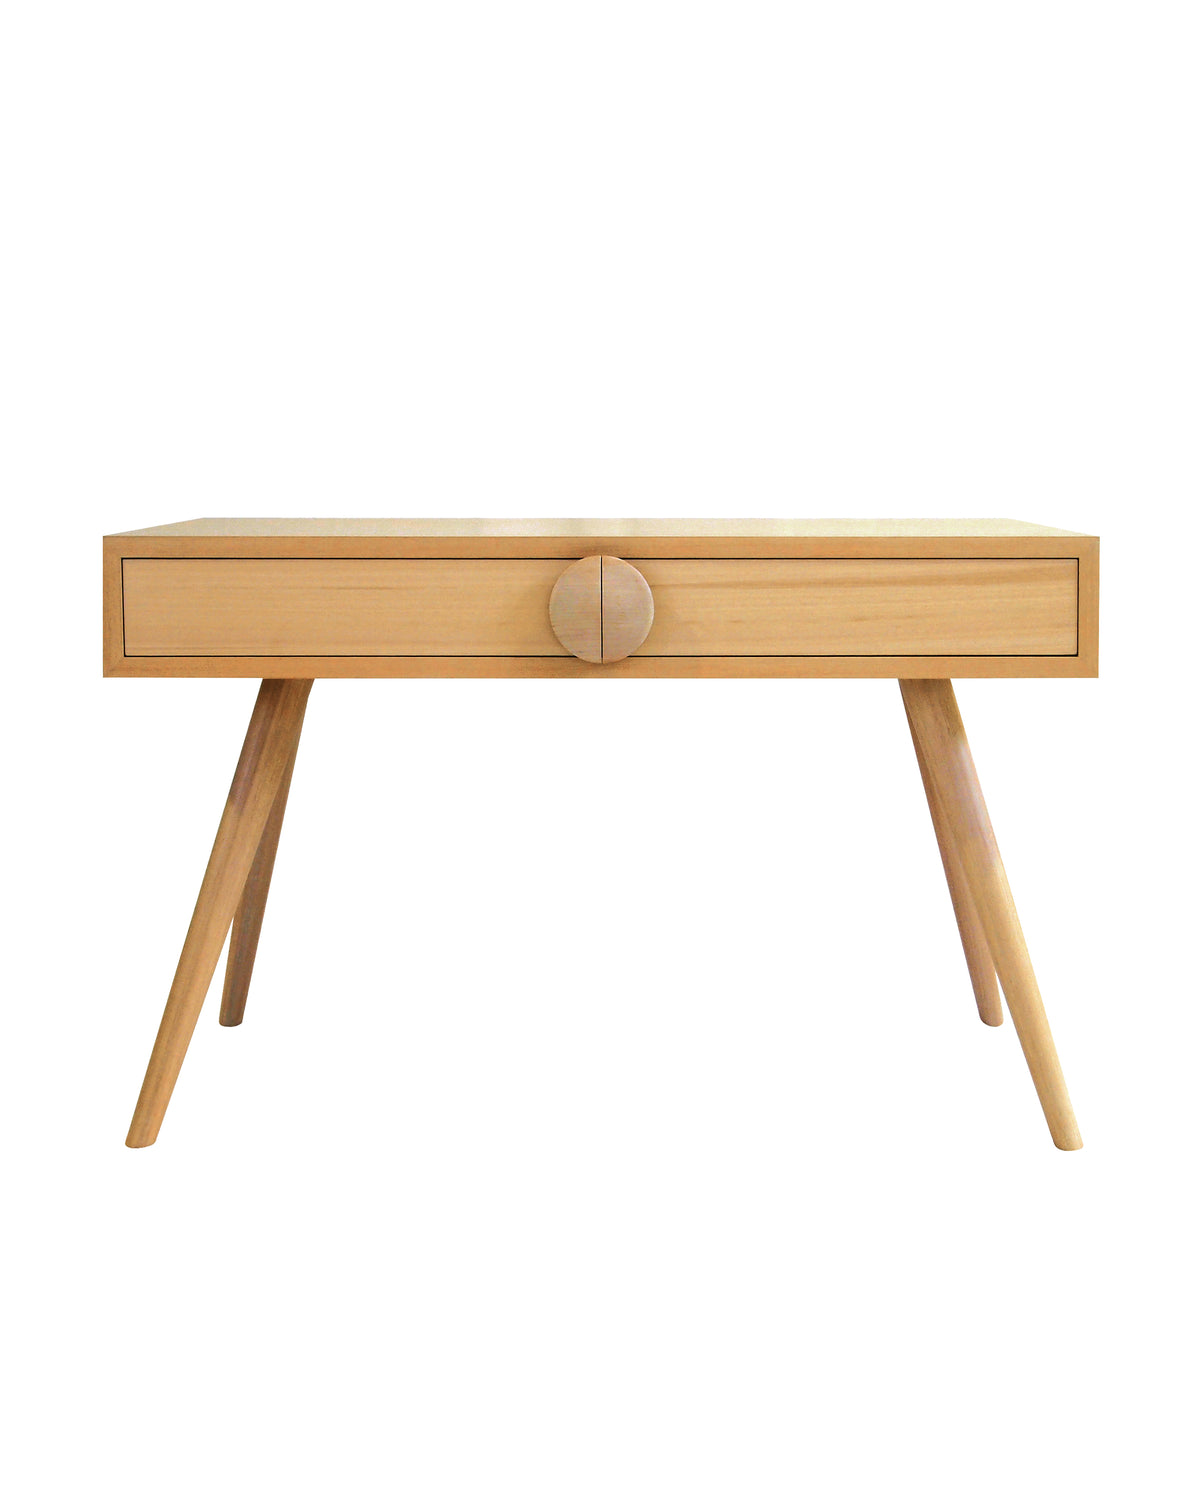 Charlie Desks feature a signature hand turned button handle and angled legs. The frame conceals intricate mitred joinery which wrap around two slim-line drawers. Designed to perfectly co-ordinate with the Charlie collection of kid's furniture.